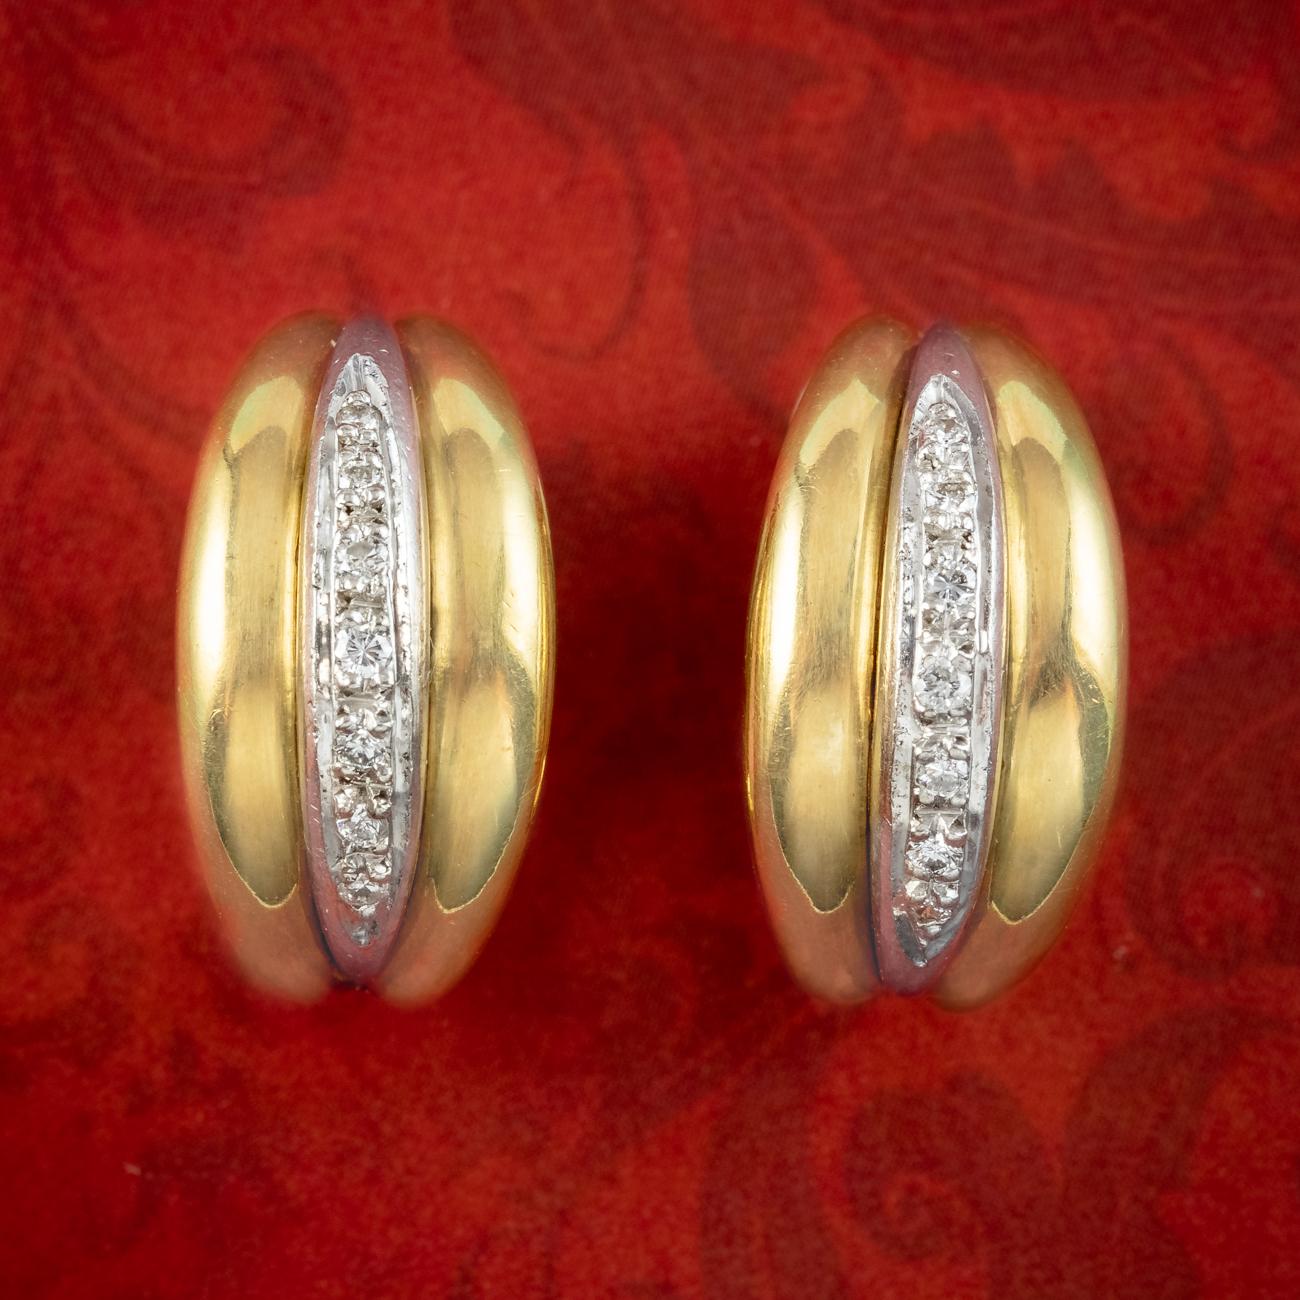 A chic pair of two-tone half hoop earrings from the late 20th Century made up of two yellow gold bands and a white gold band in the centre lined with twinkling brilliant cut diamonds along the top (approx. 0.40ct total).

Diamonds are truly a stone